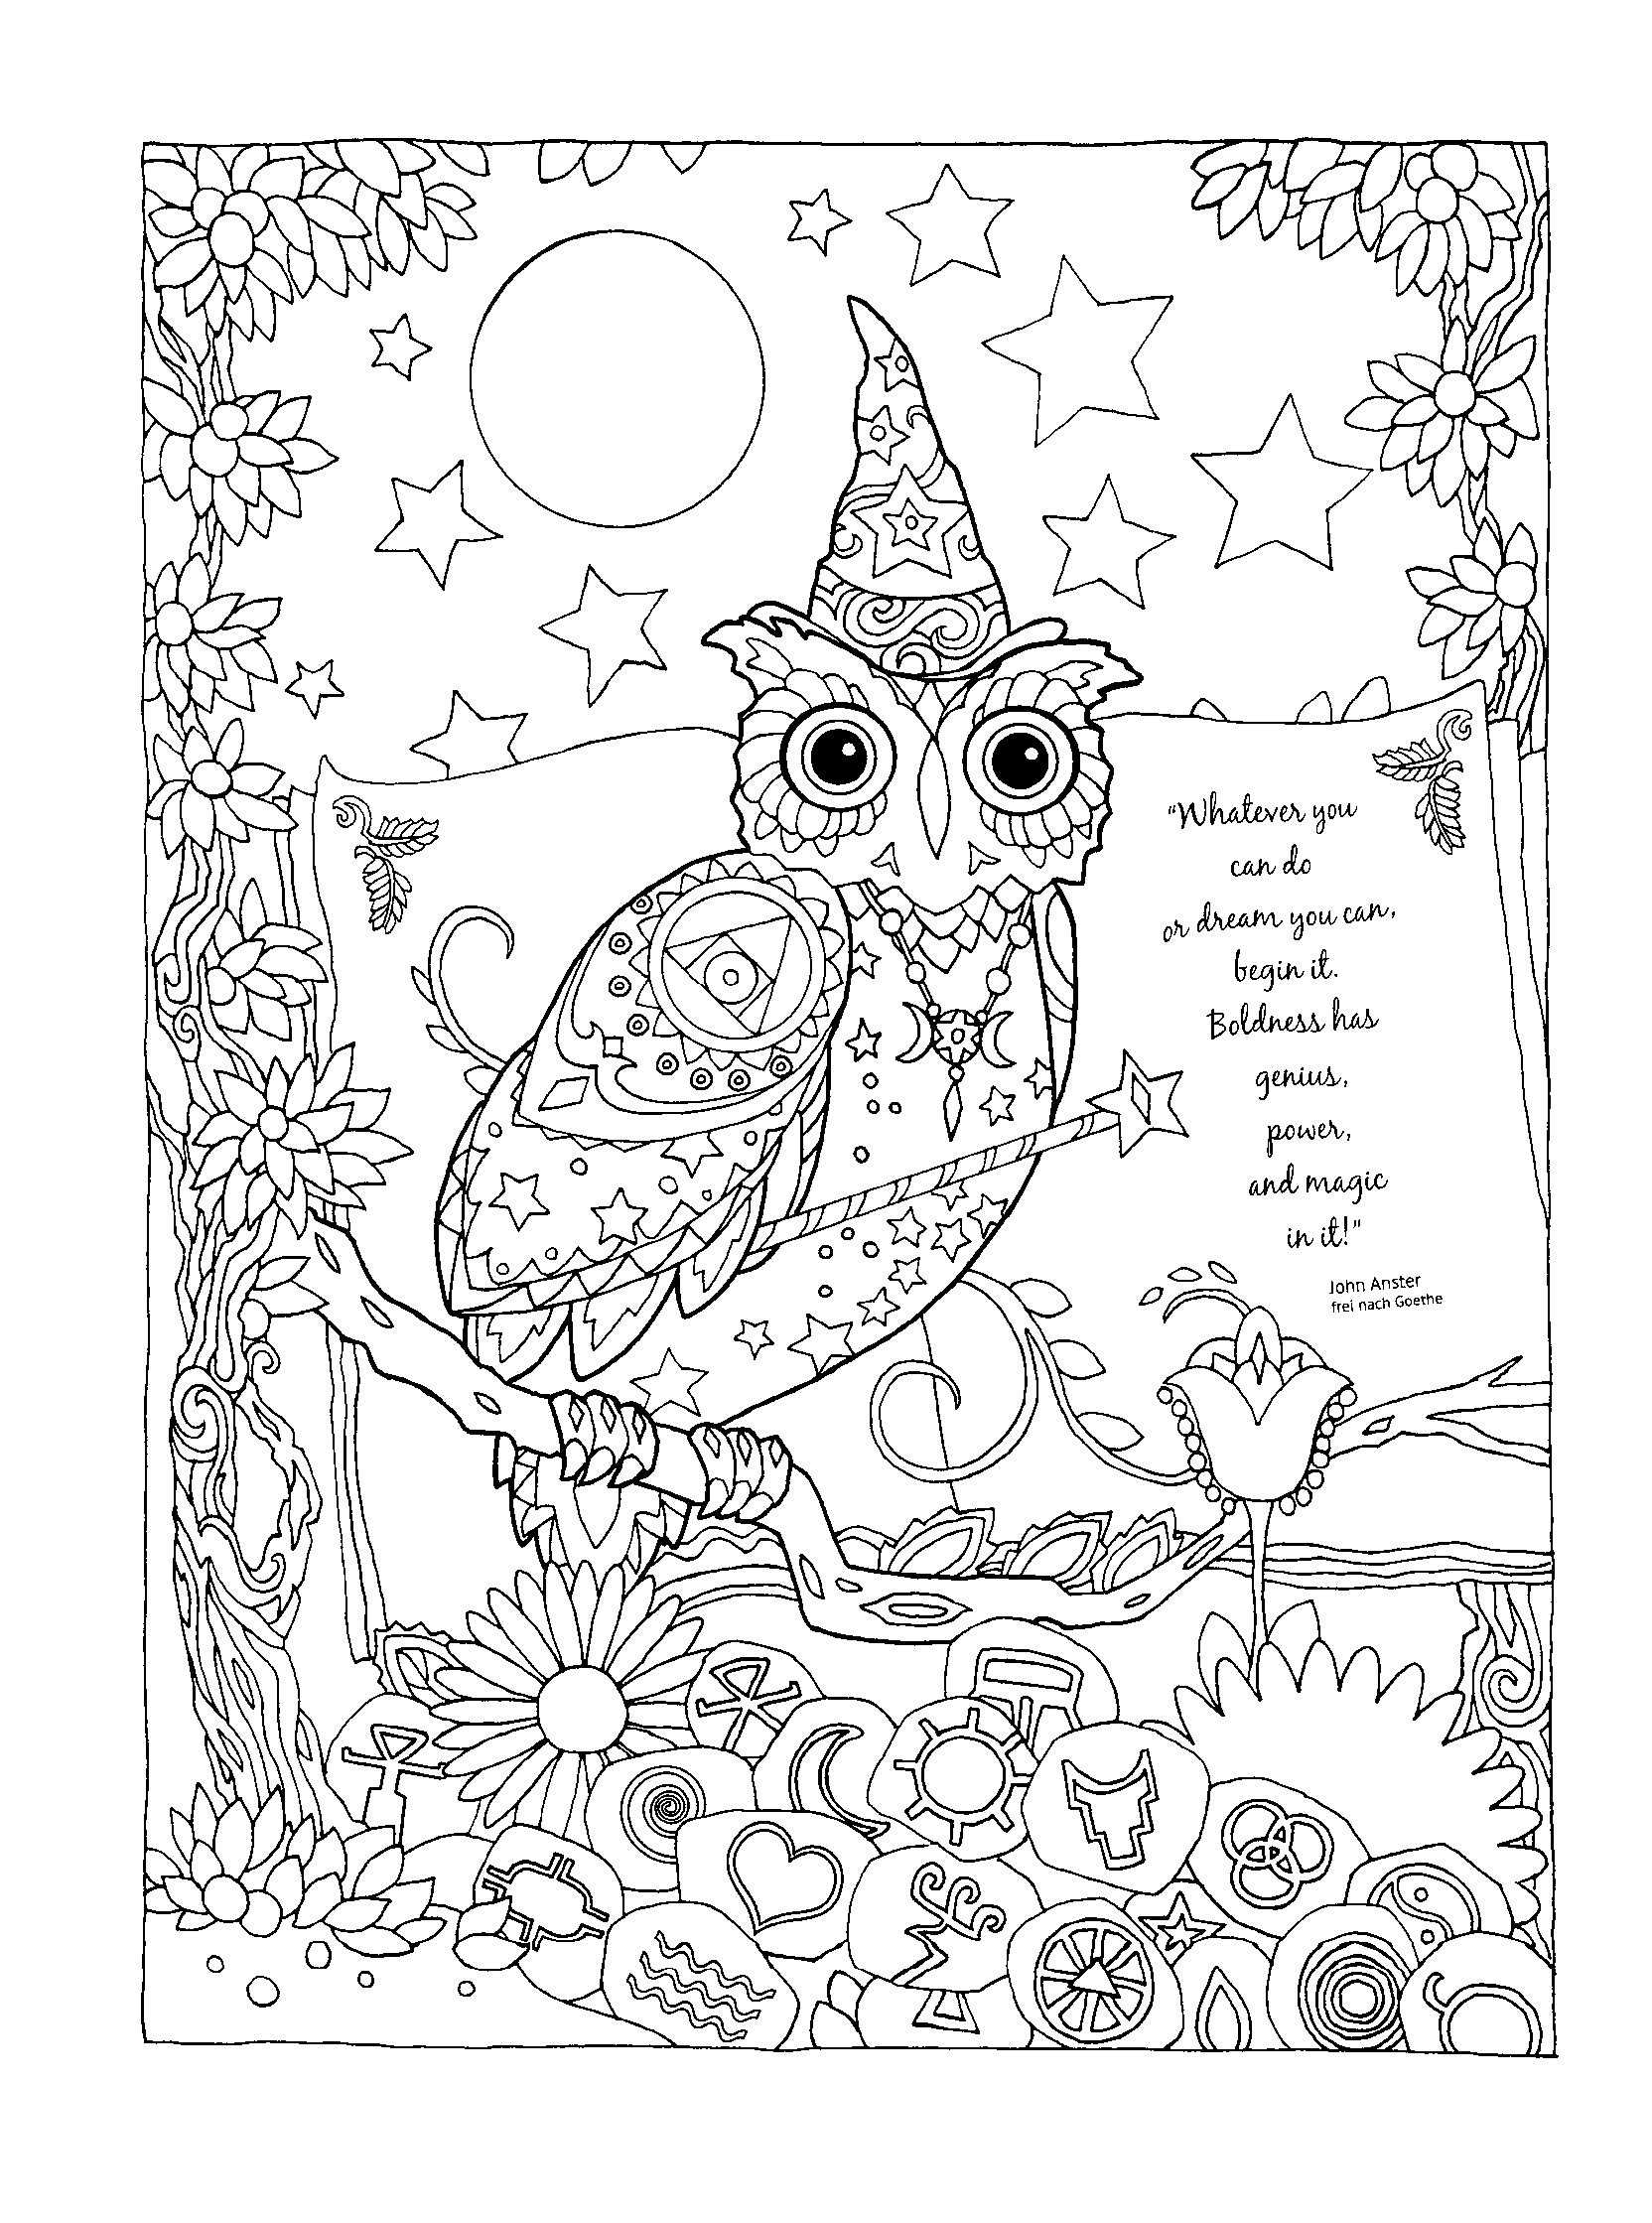 Connect the Dots Worksheets as Well as Coloring Page for Kids Cool Coloring Pages